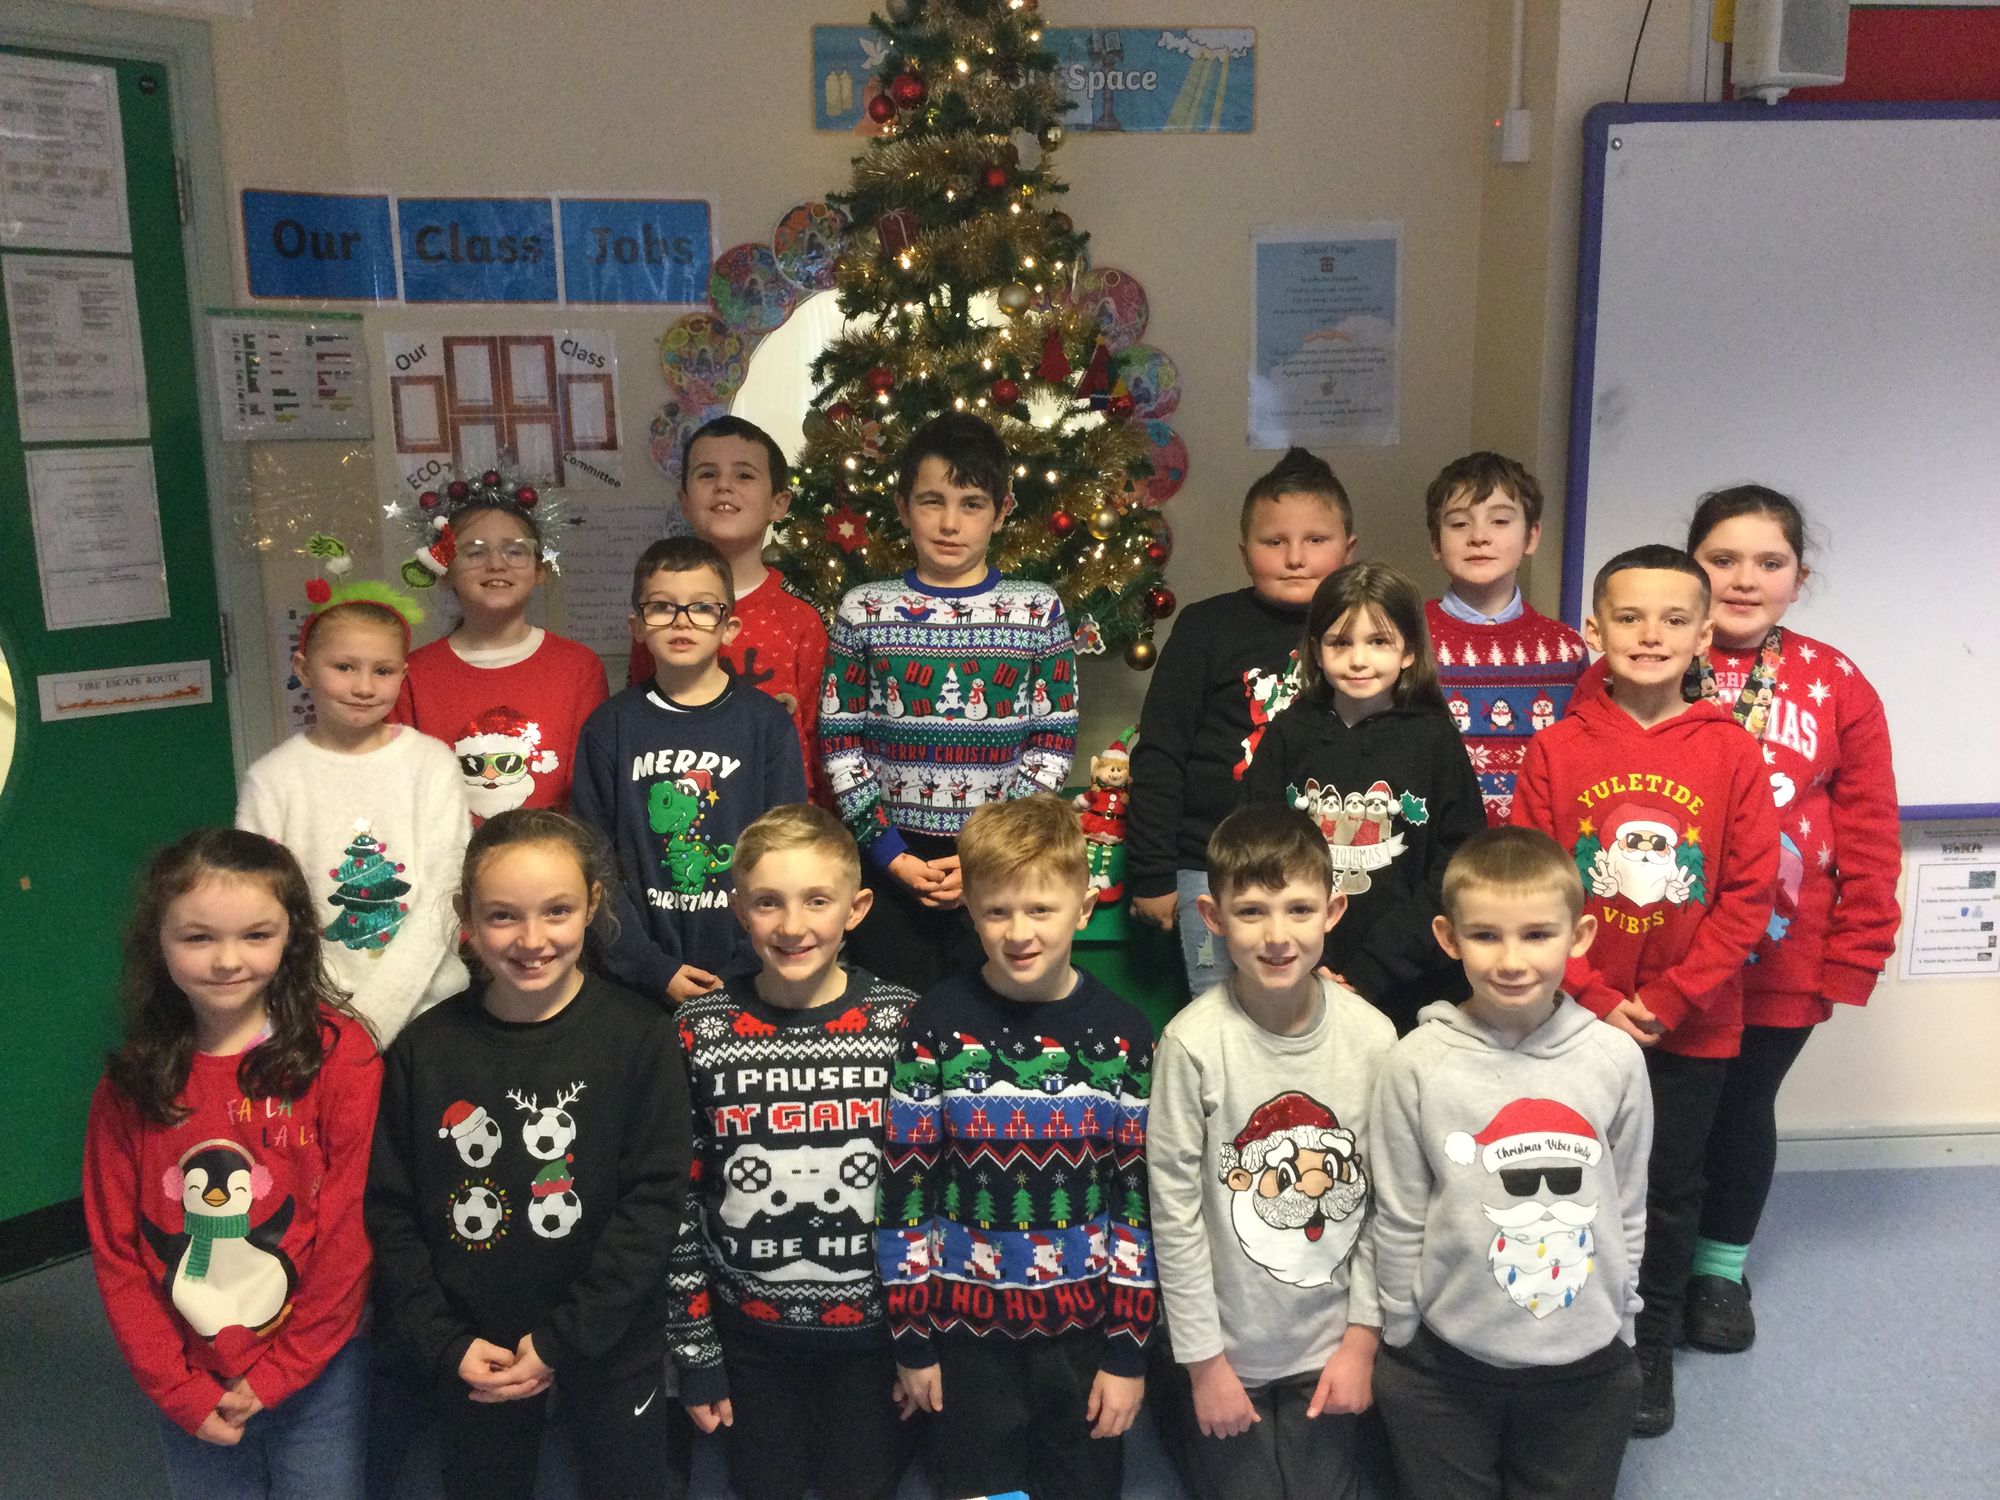 Year 4C enjoying our Christmas jumper day